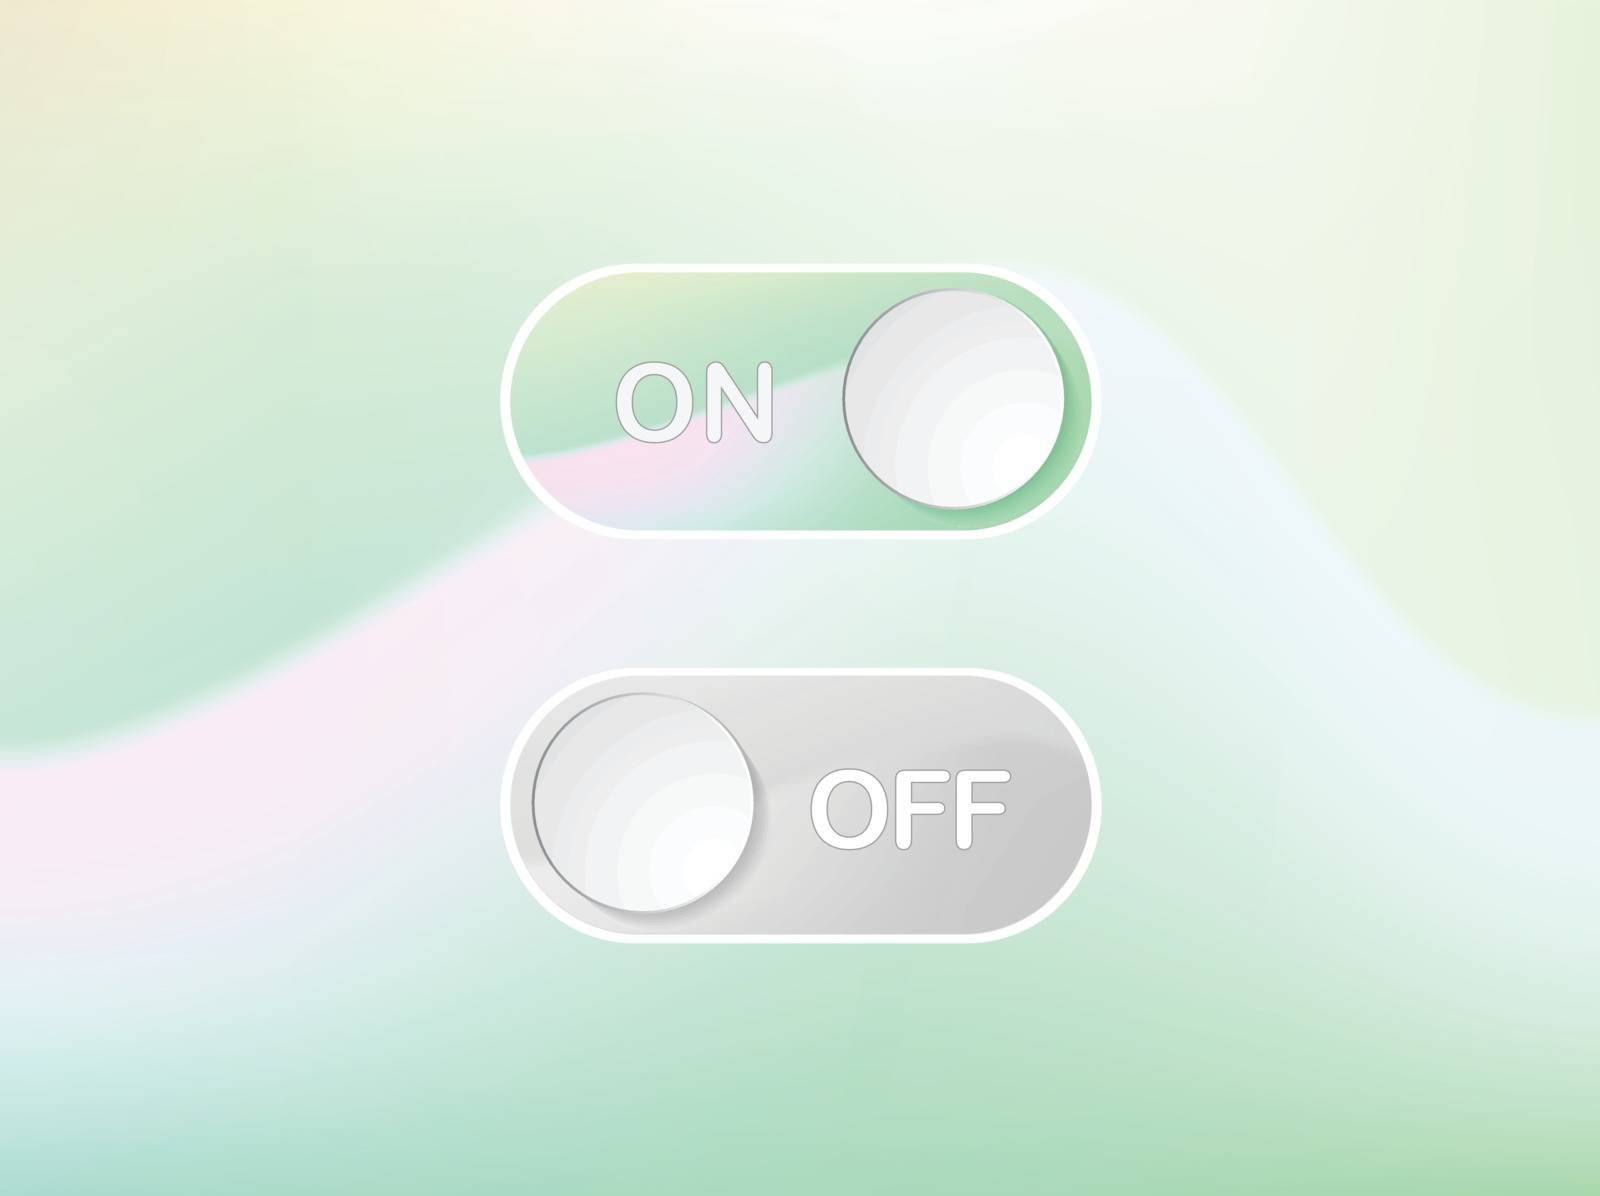 The Vector green interface icon On and Off Toggle switch holographic art button